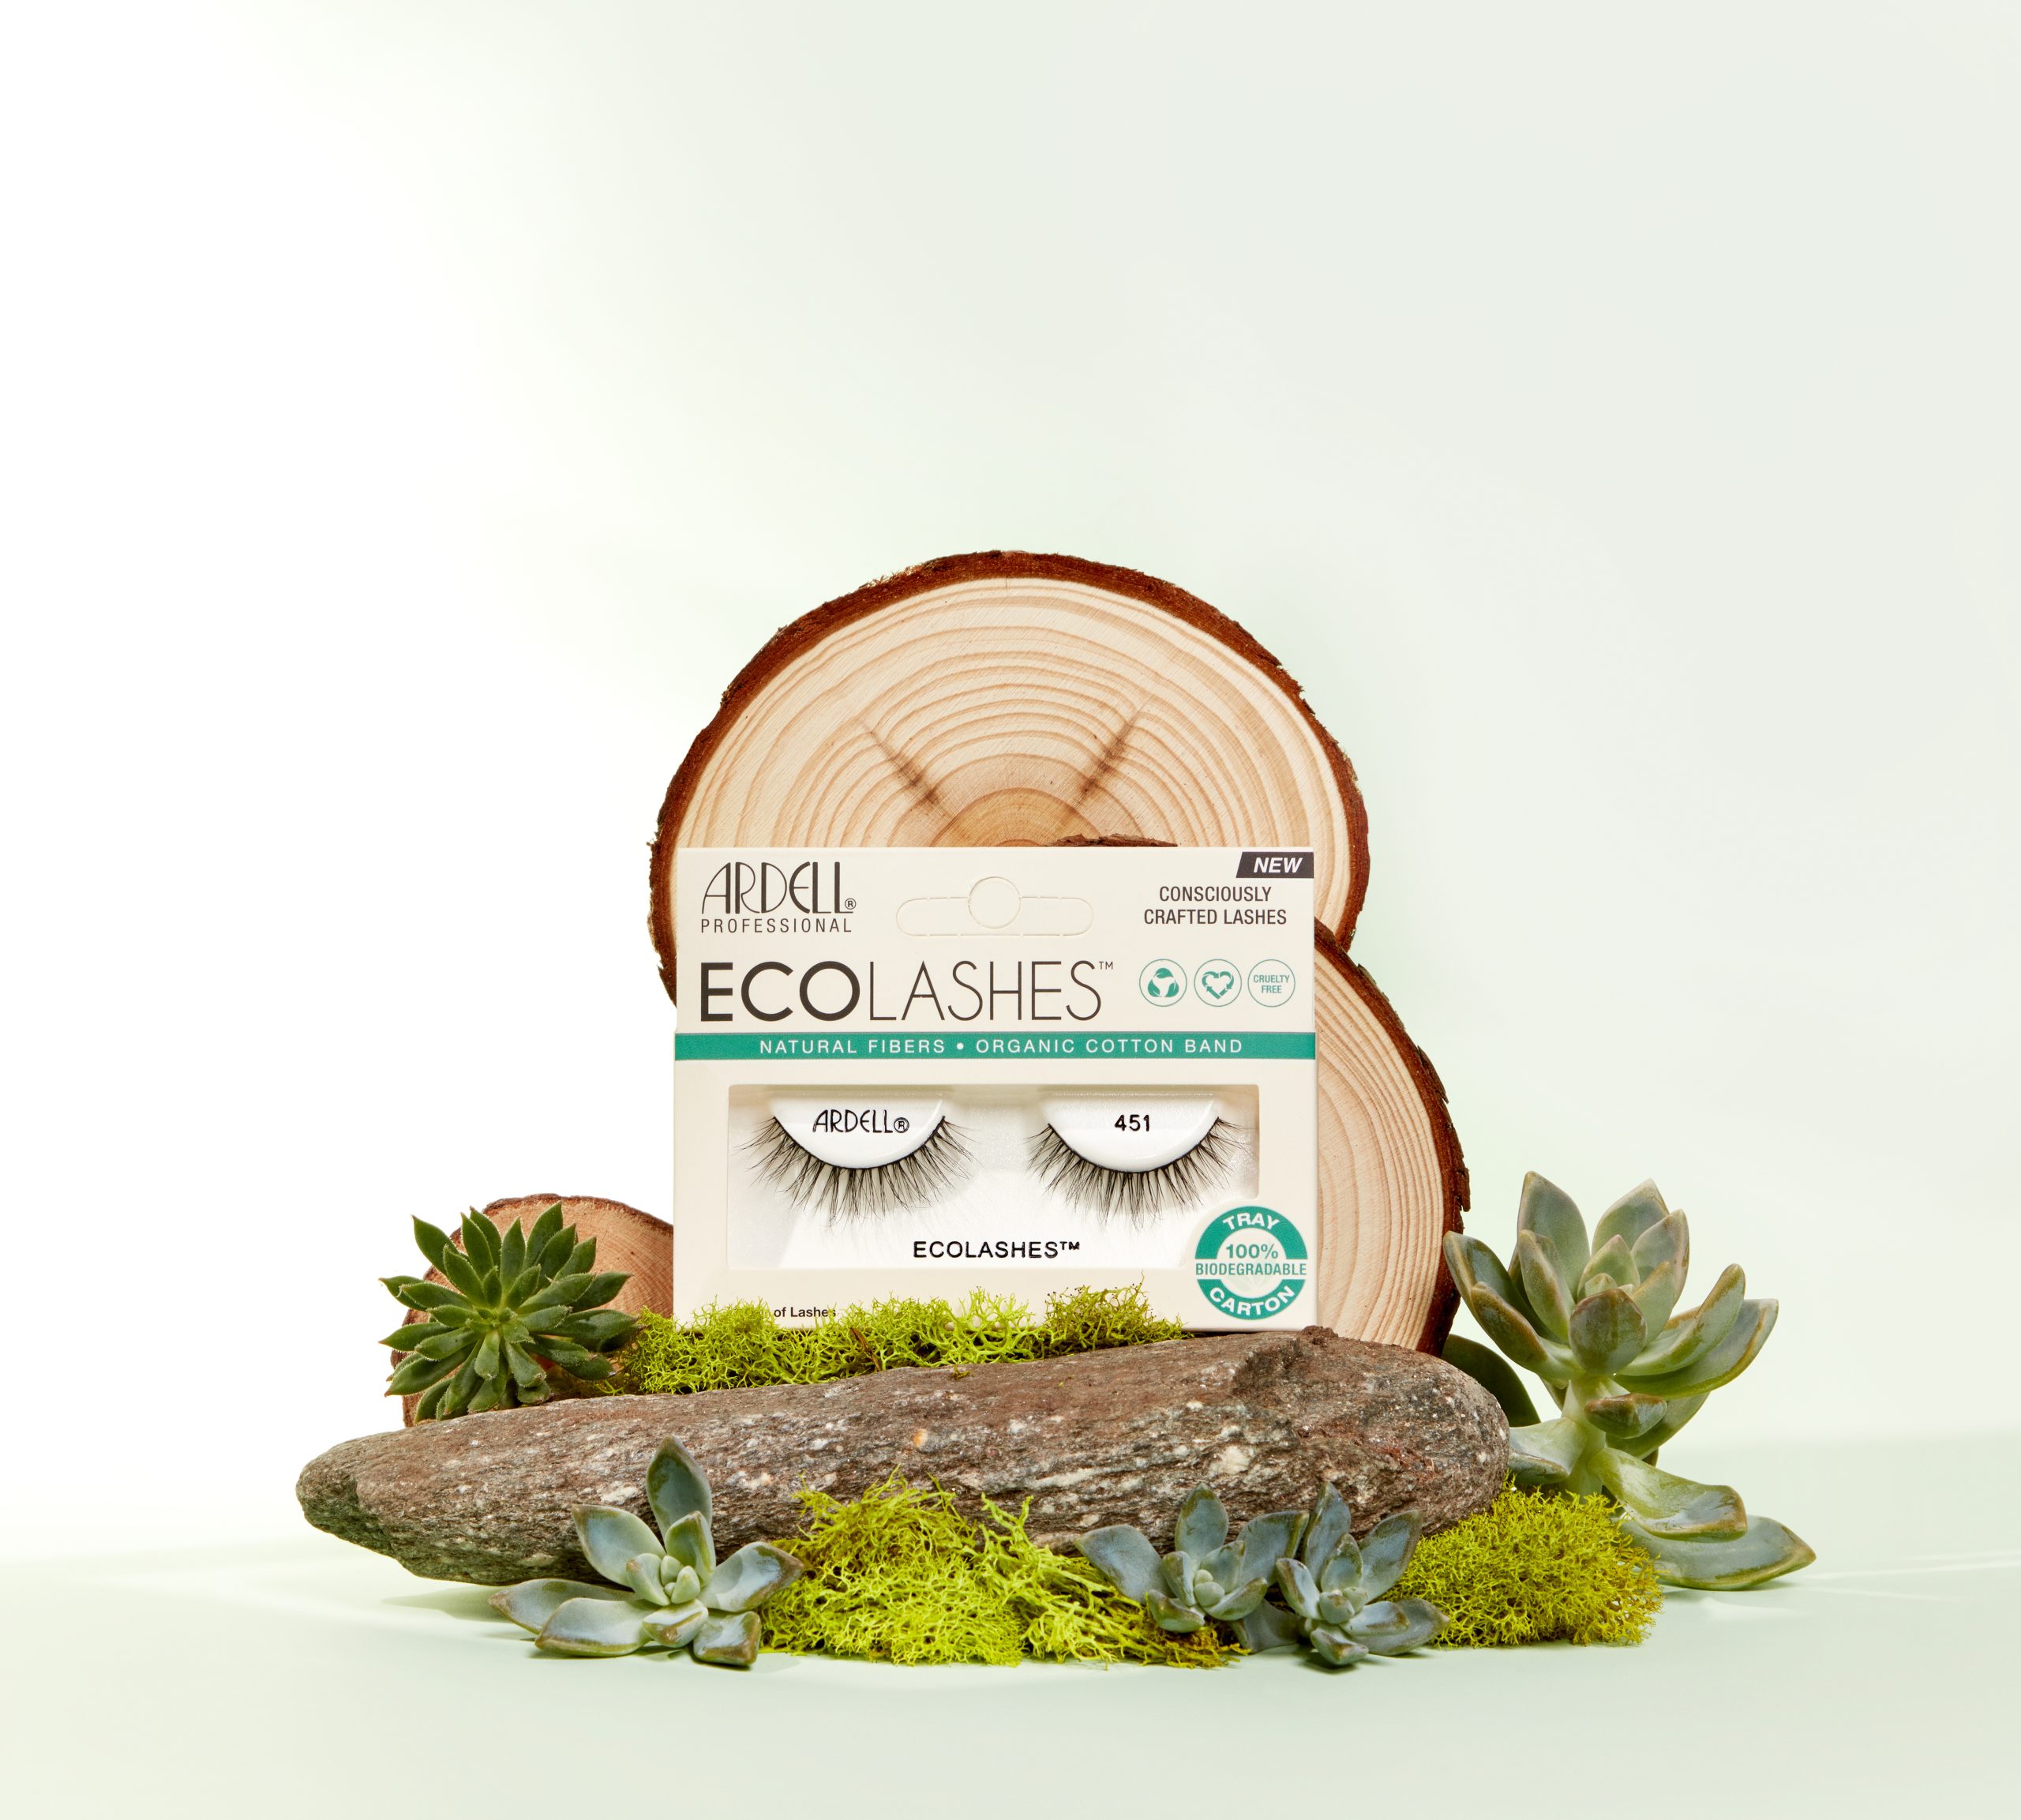 Ardell Eco Lashes campaign images_RRP$12 (5)